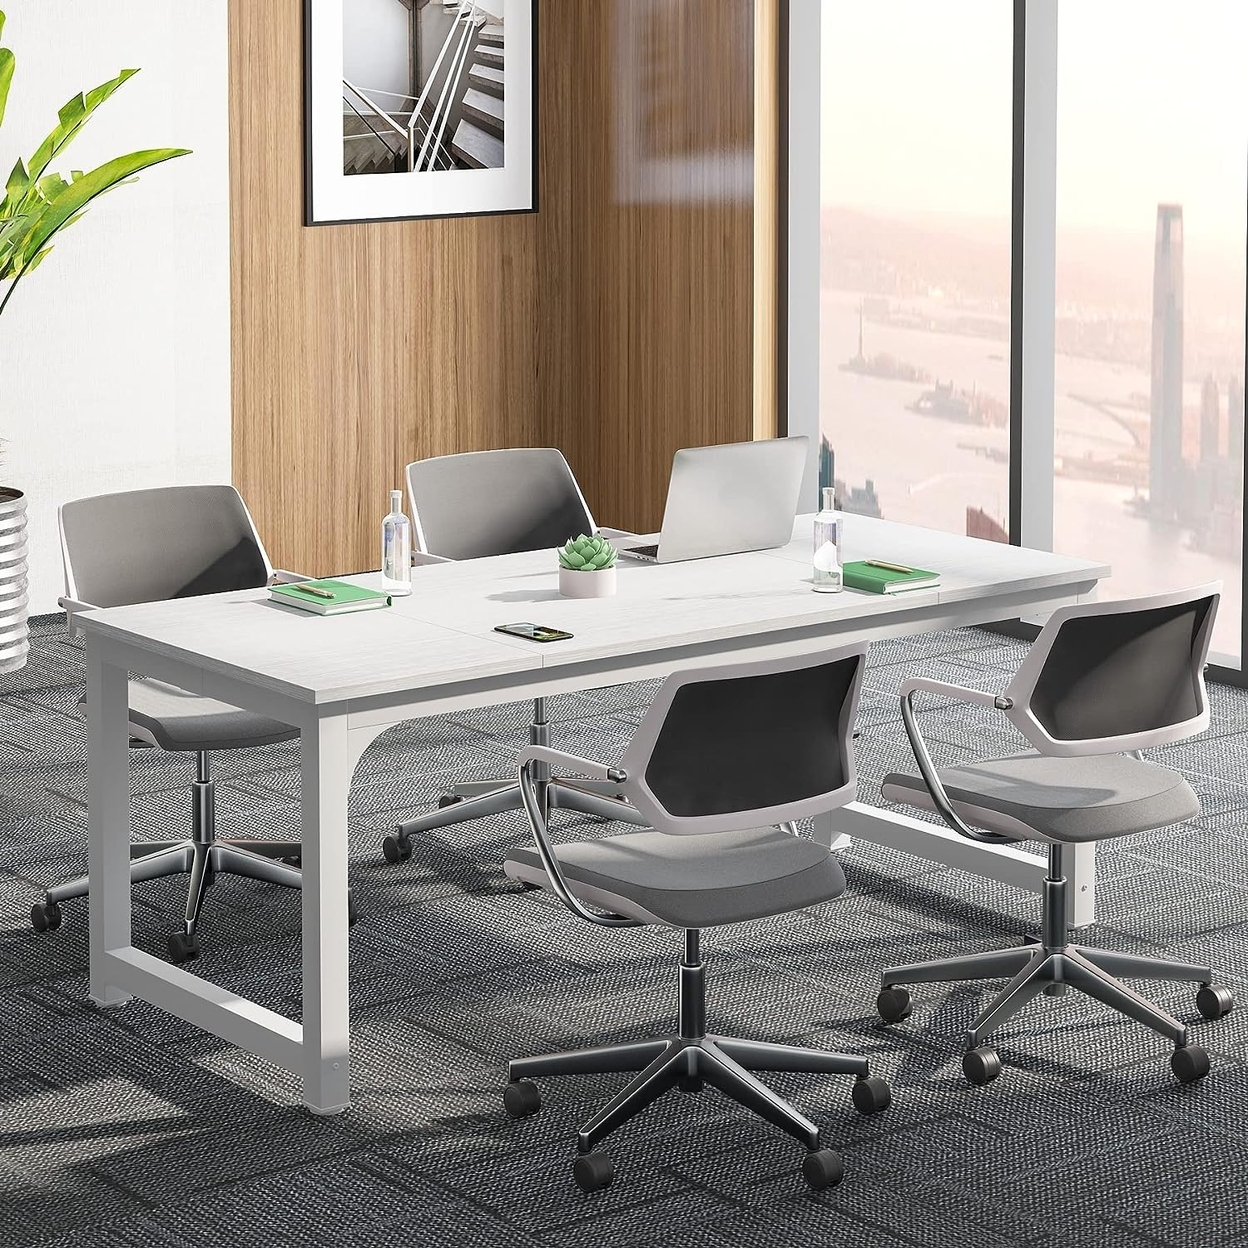 Tribesigns 6FT Conference Table, 70.8 W X 31.5 D Meeting Room Table Boardroom Desk For Office Conference Room - White